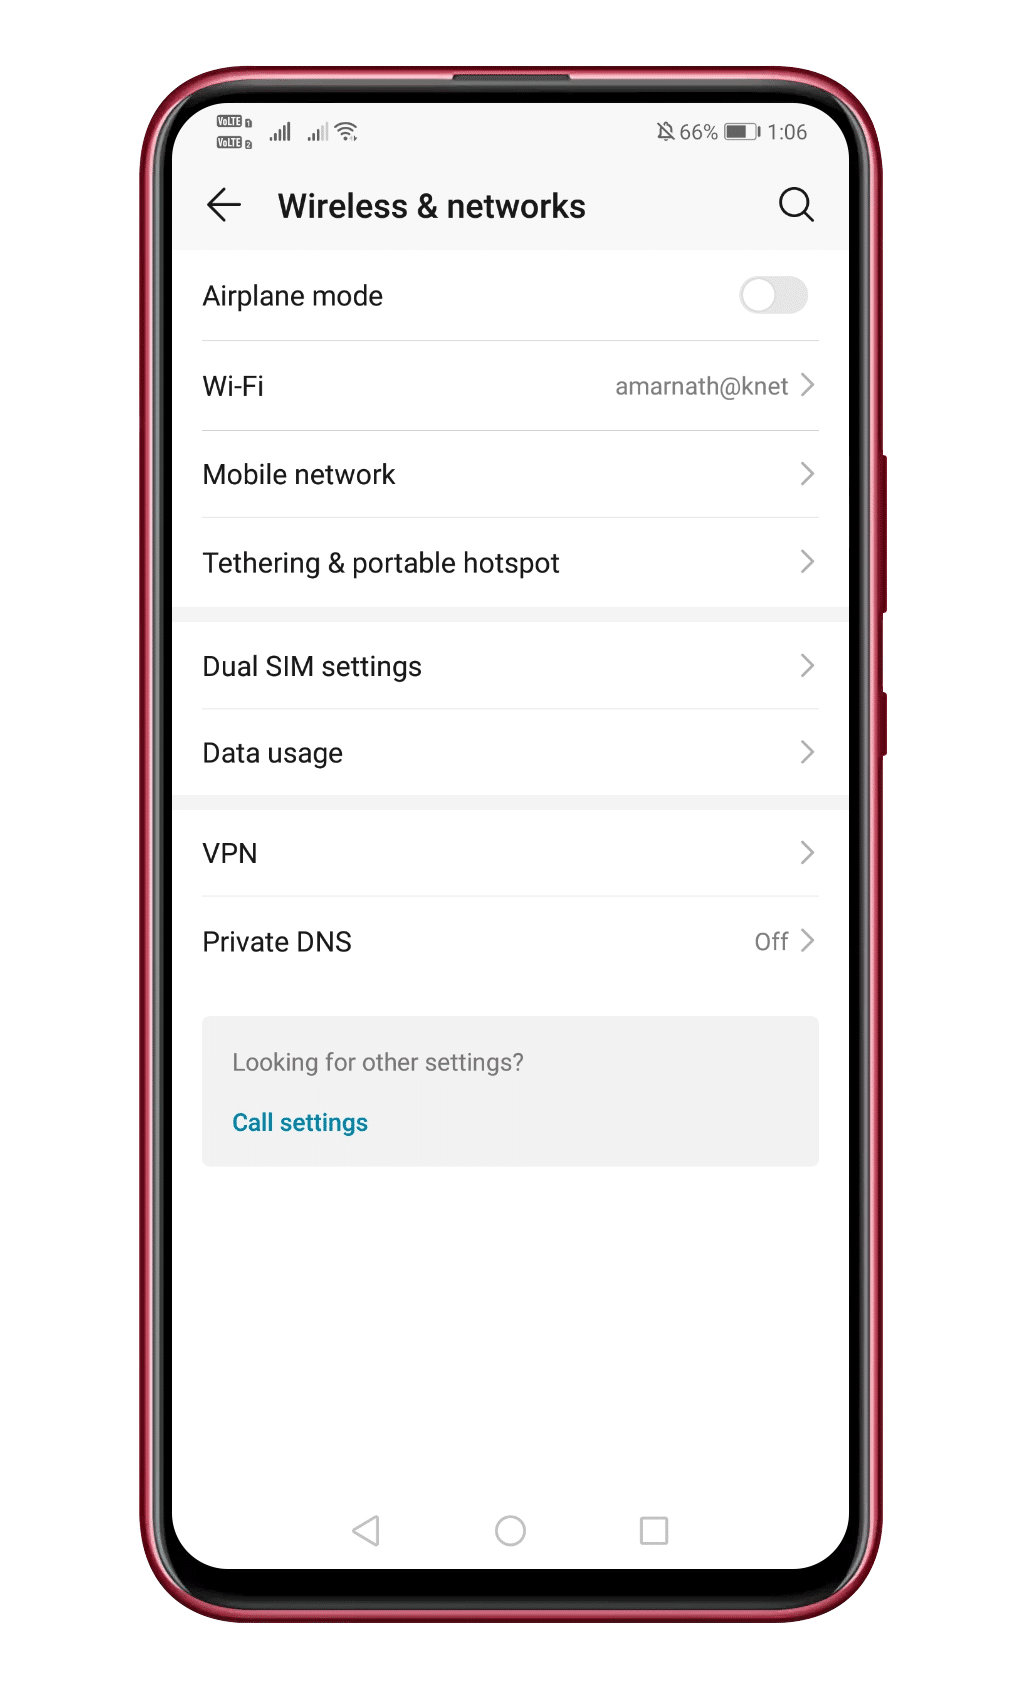 Tap on the 'Private DNS' option